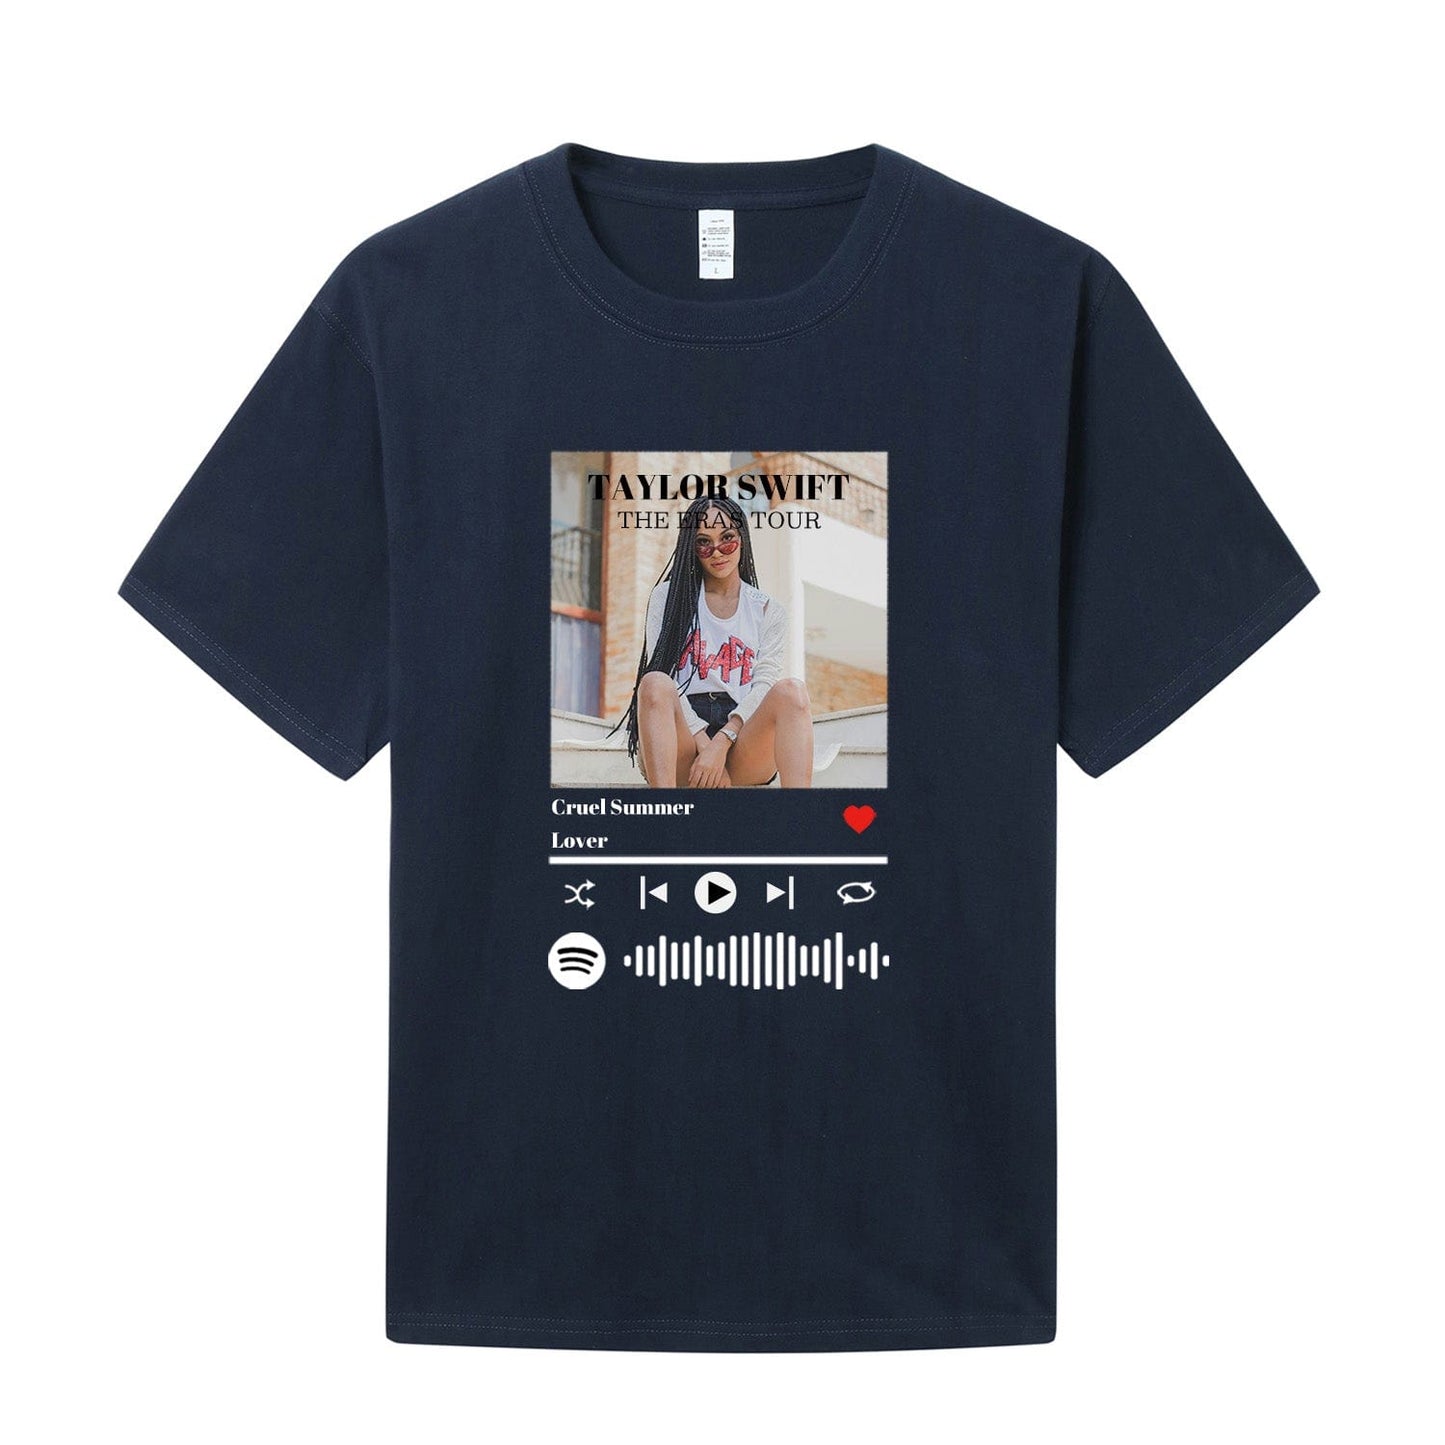 Custom Spotify Scannable Music Code T-shirt With Photo